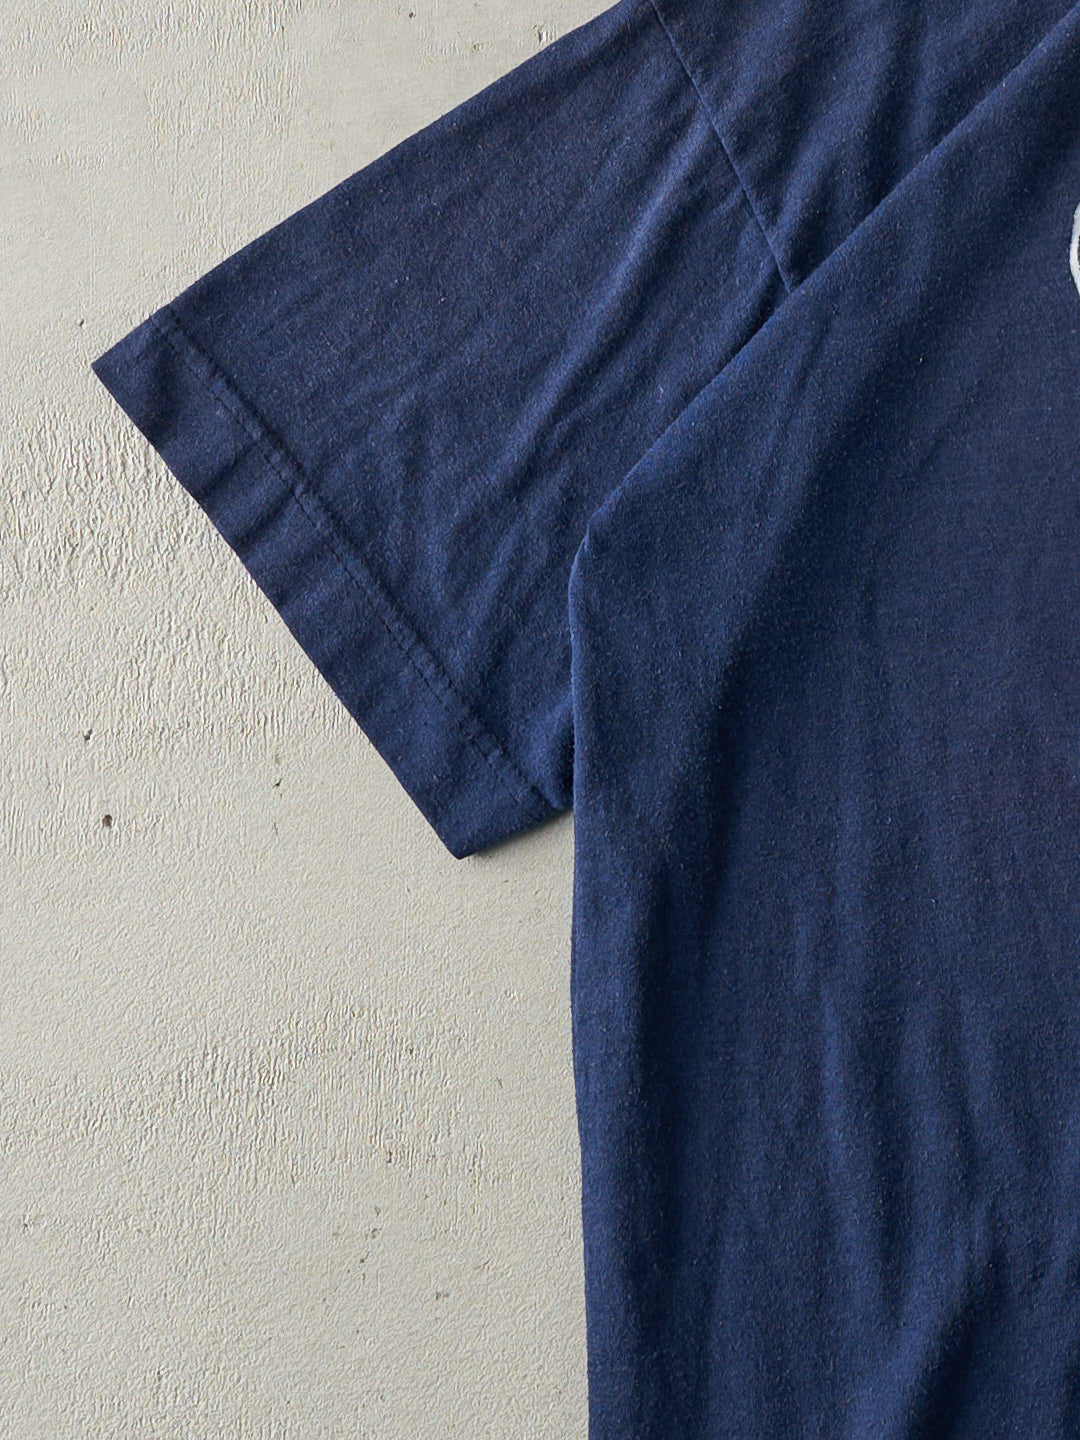 Vintage 80s Navy Blue Guess Jeans Bootleg Tee (M)